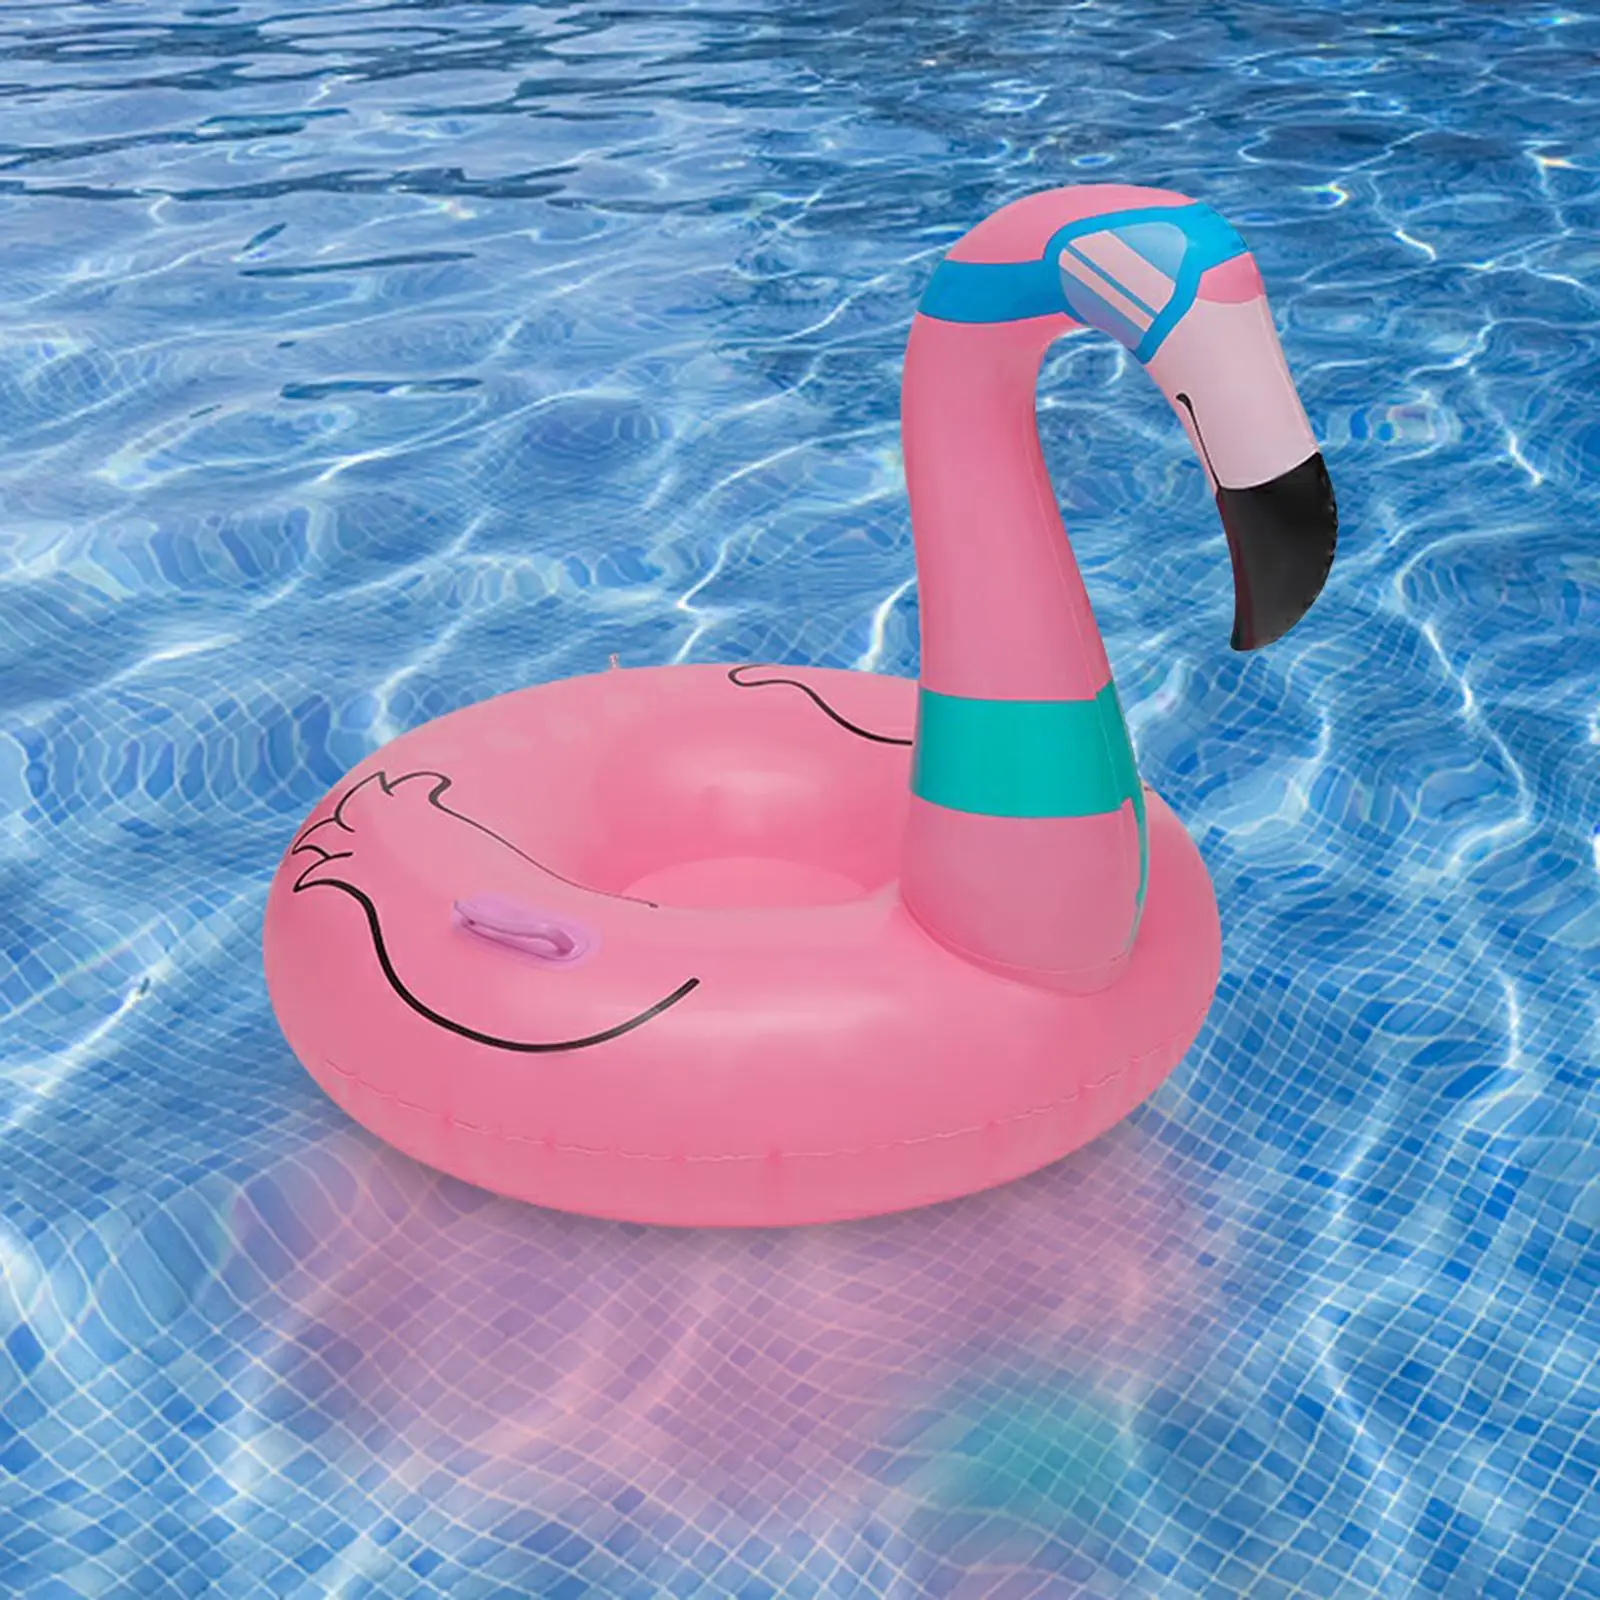 Inflatable Snow Tube Large Flamingo Snow Tube with Sturdy Handles for Outdoor